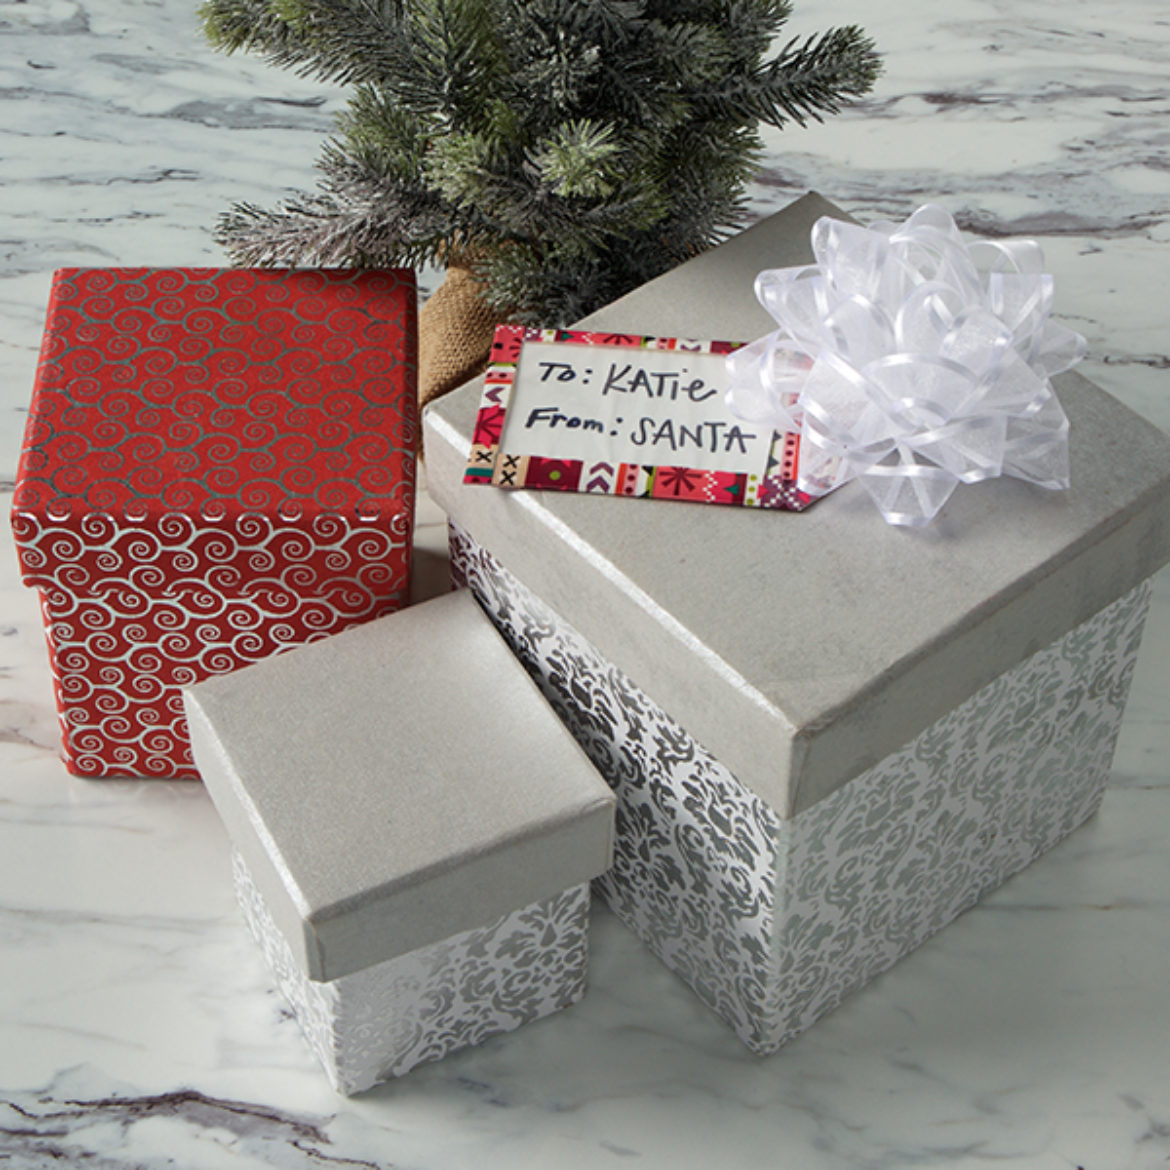 Completed Duck Tape® Gift Tag on presents